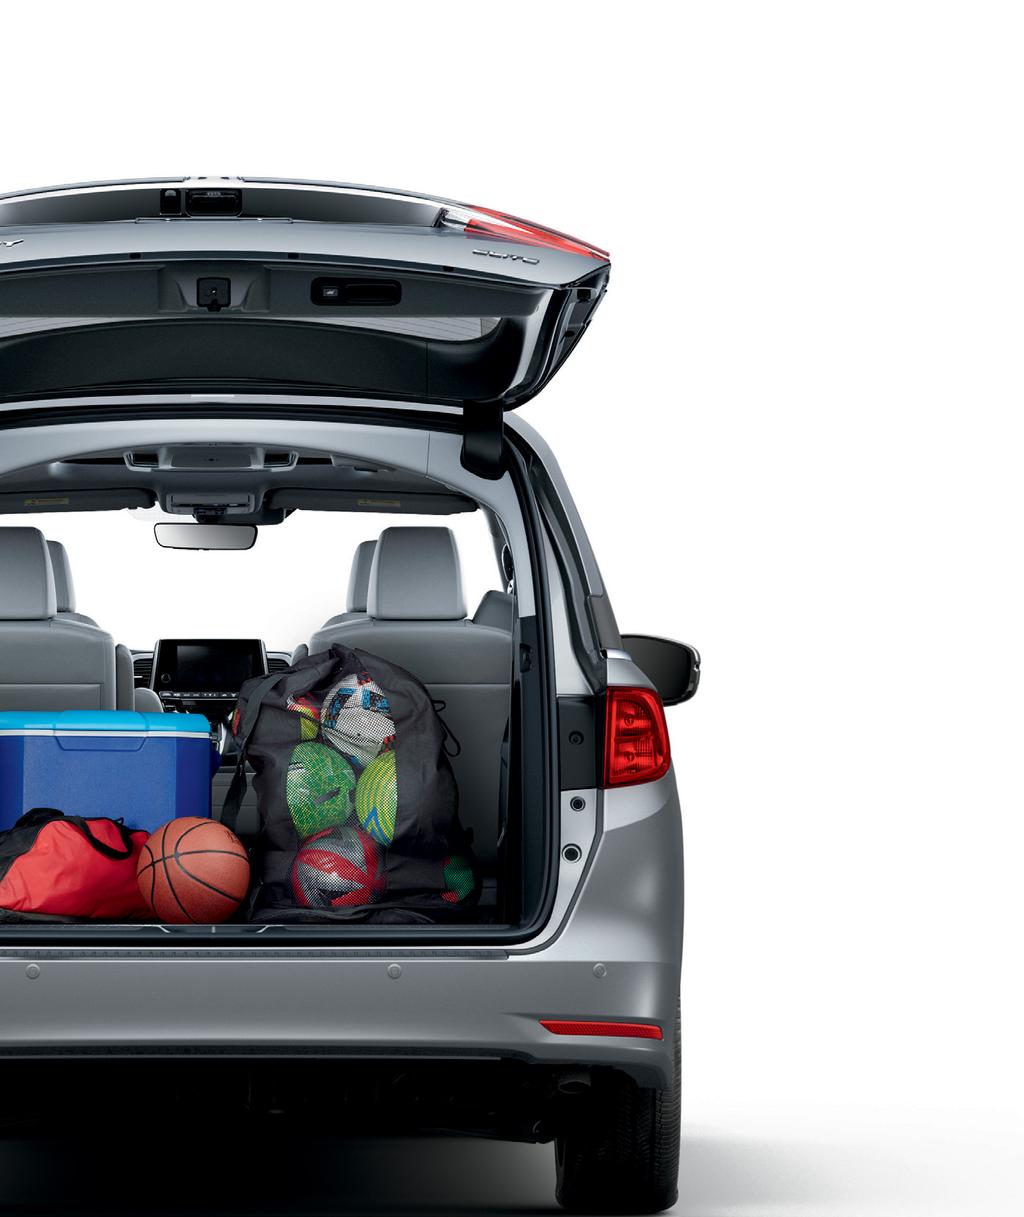 Built in the U.S.A. The Honda Odyssey is proudly built in Alabama using domestic and globally sourced parts. Follow or share the Odyssey experience across the Odyssey Facebook page, Twitter and more.